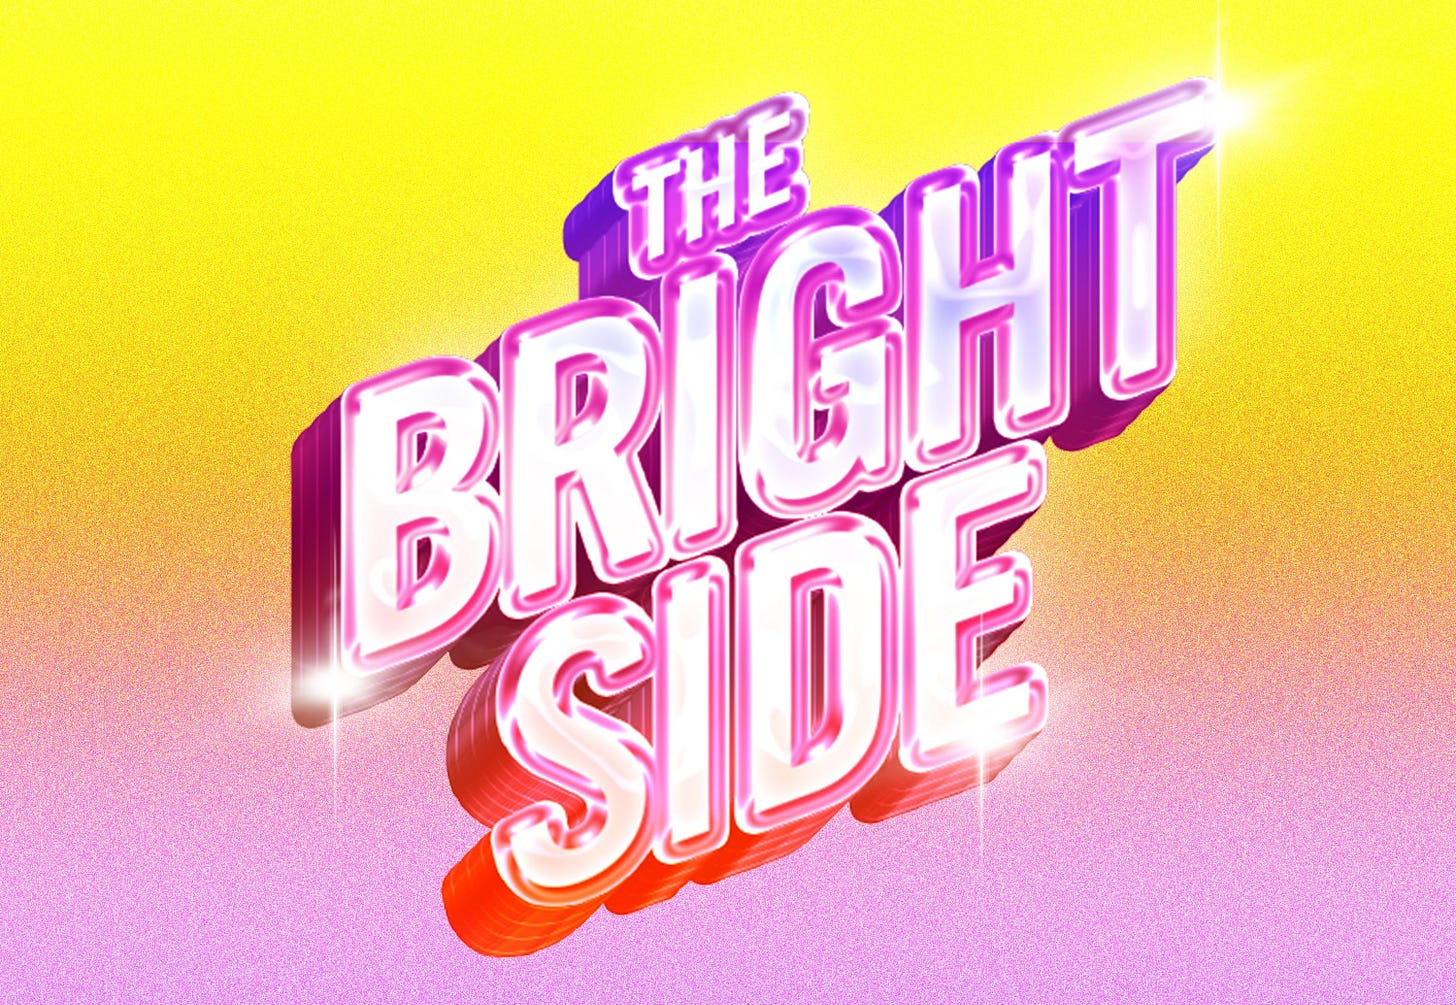 Hello Sunshine & iHeartPodcasts Team On 'The Bright Side'